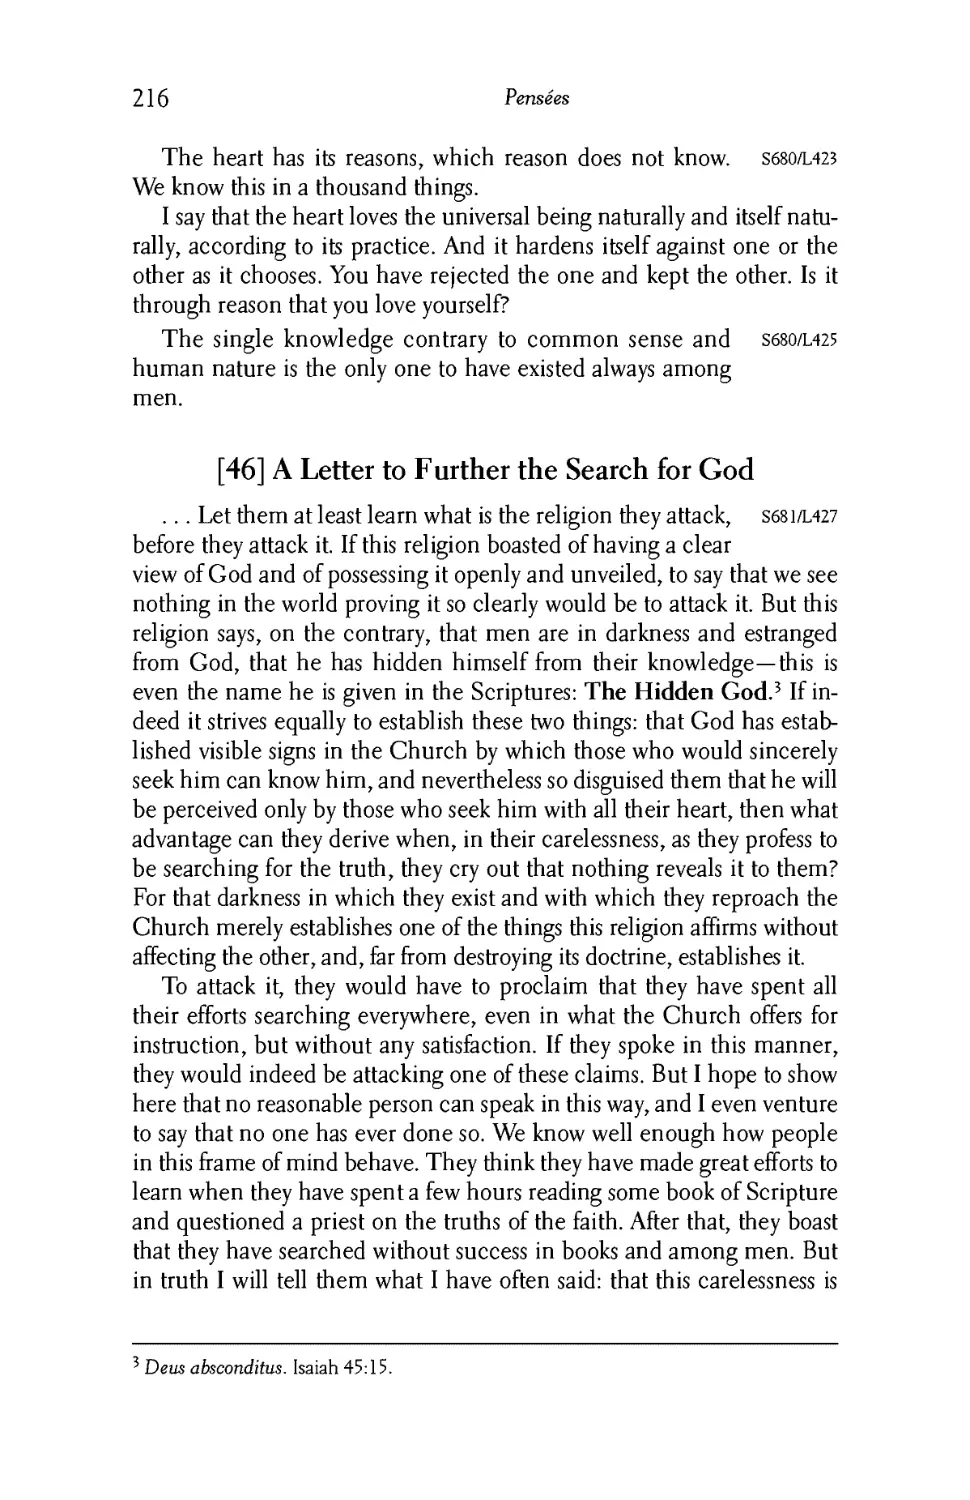 46. A Letter to Further the Search for God